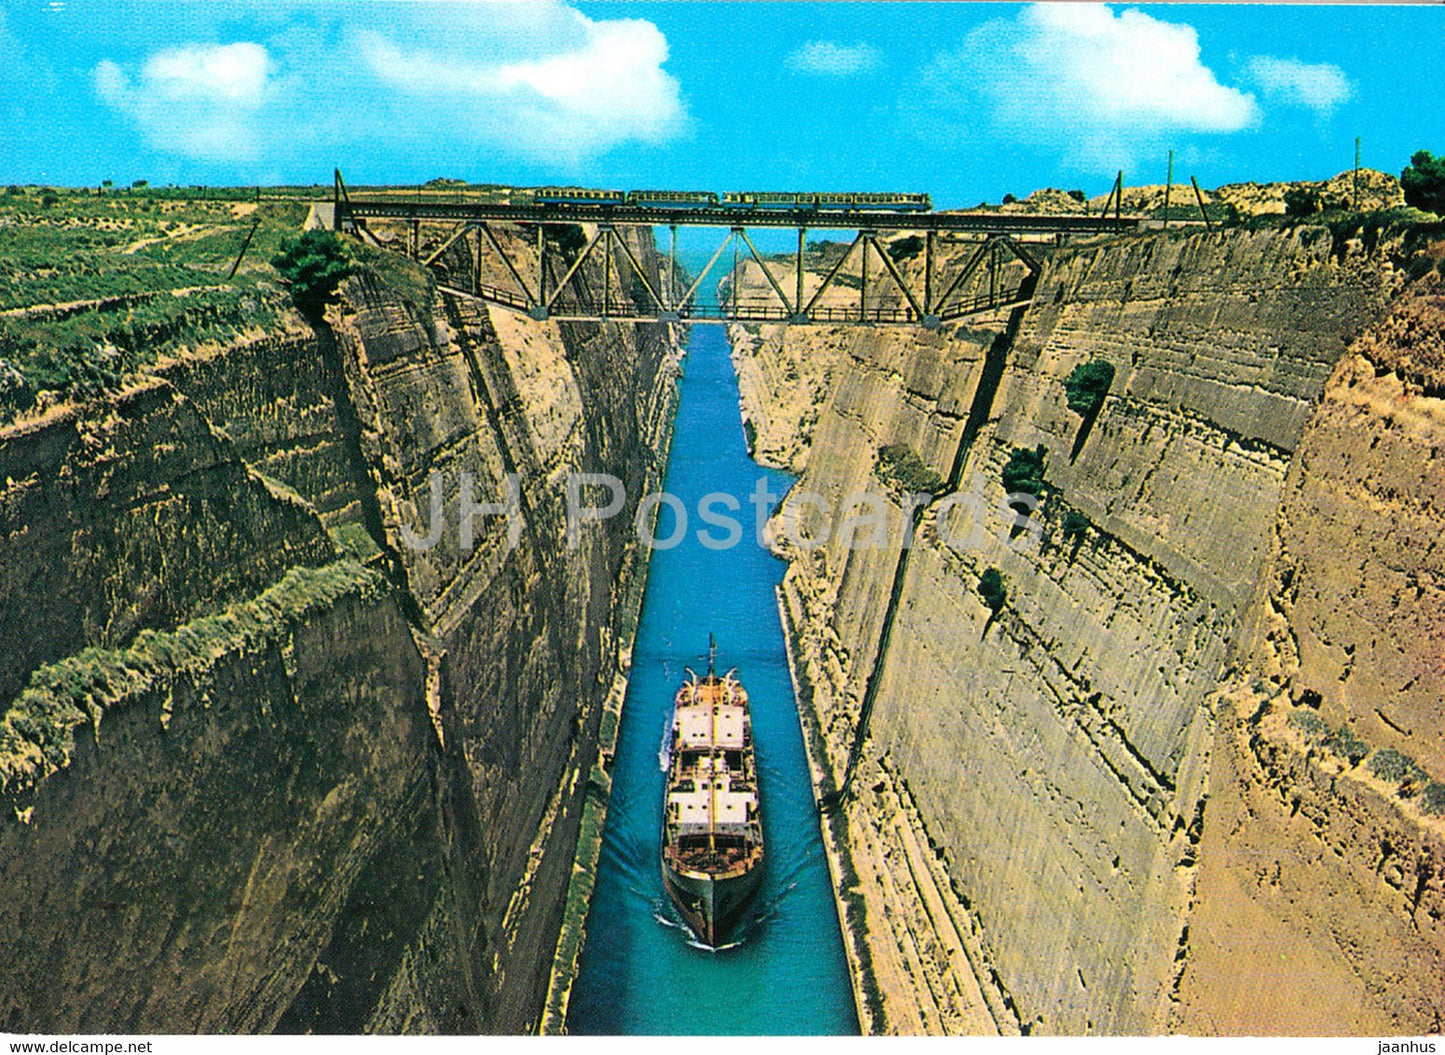 Corinth - The Canal - ship - Greece - used - JH Postcards